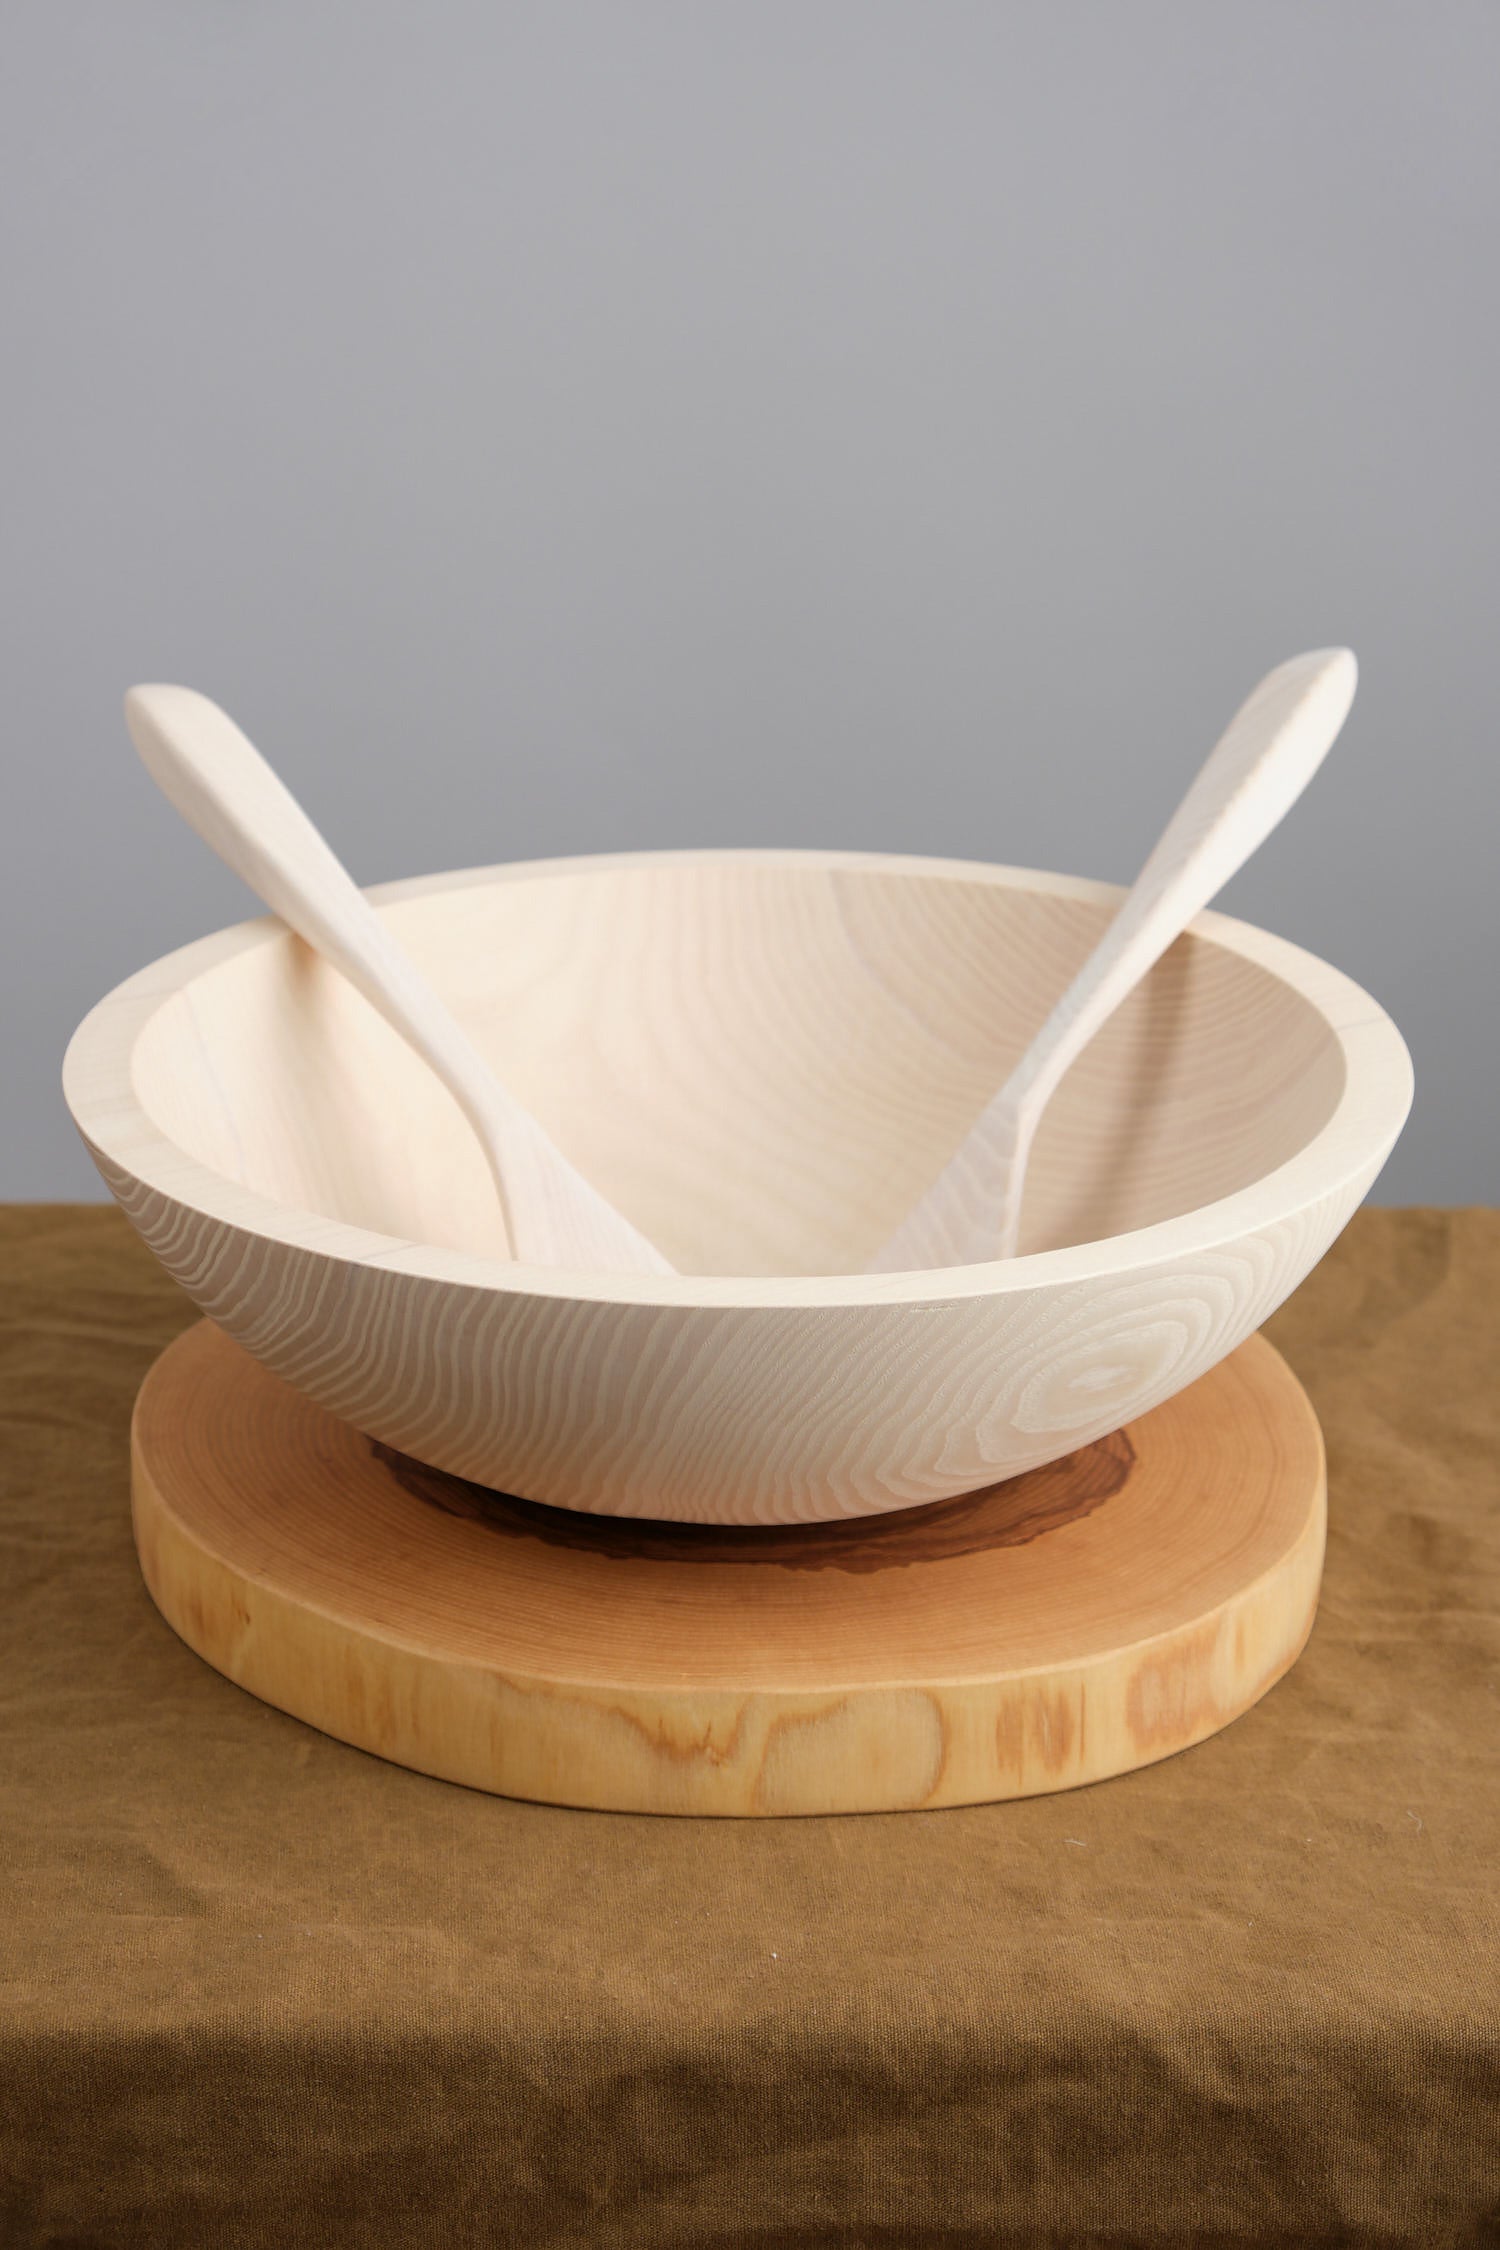 15" Craft Wooden Bowl in White